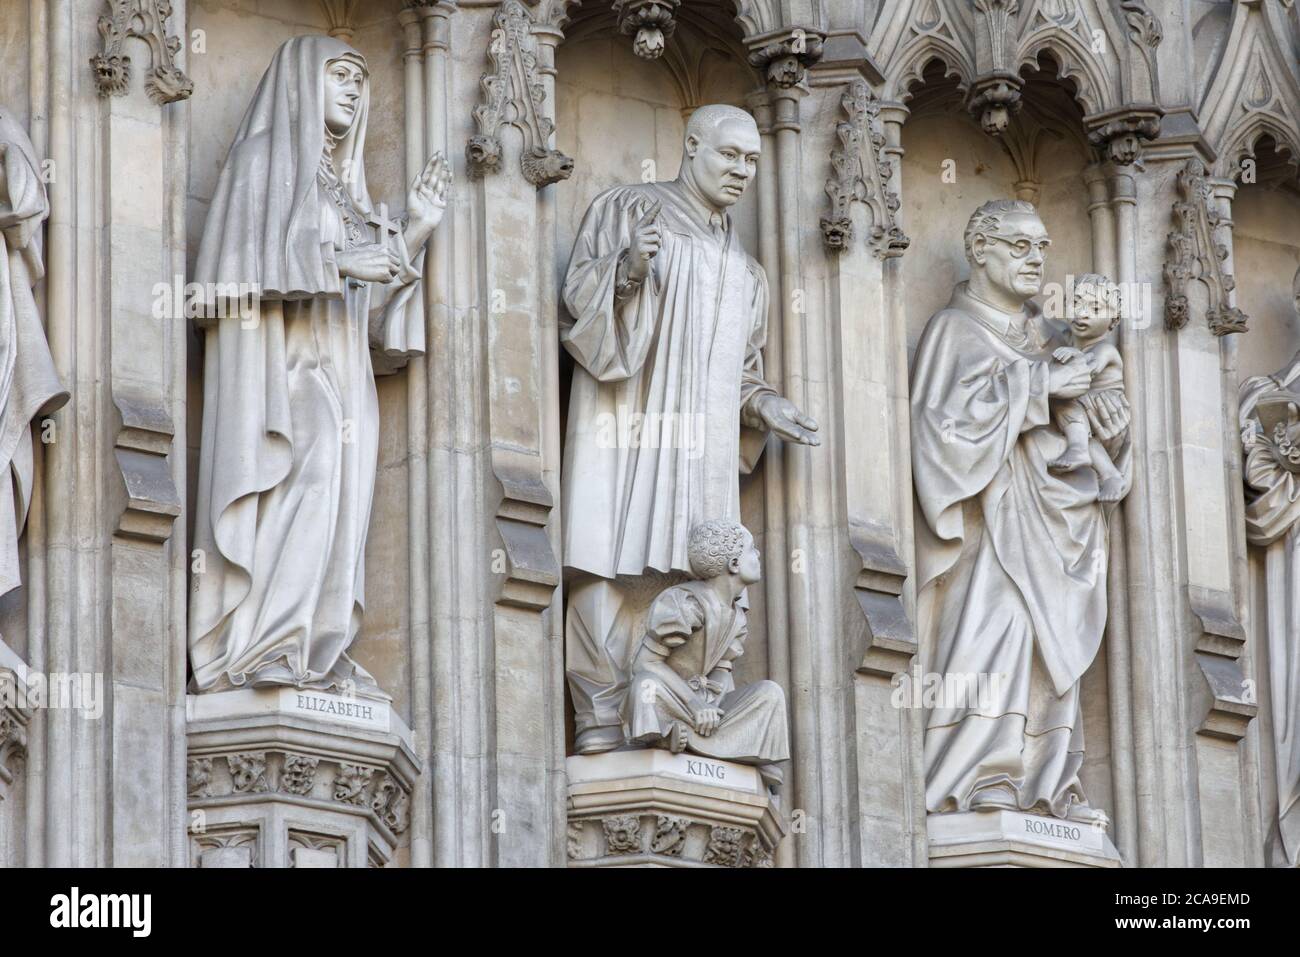 Grand Duchess Elizabeth of Russia, Martin Luther King, Oscar Romero, 20th century martyrs on the facade above the Great West Door of Westminster Abbey Stock Photo